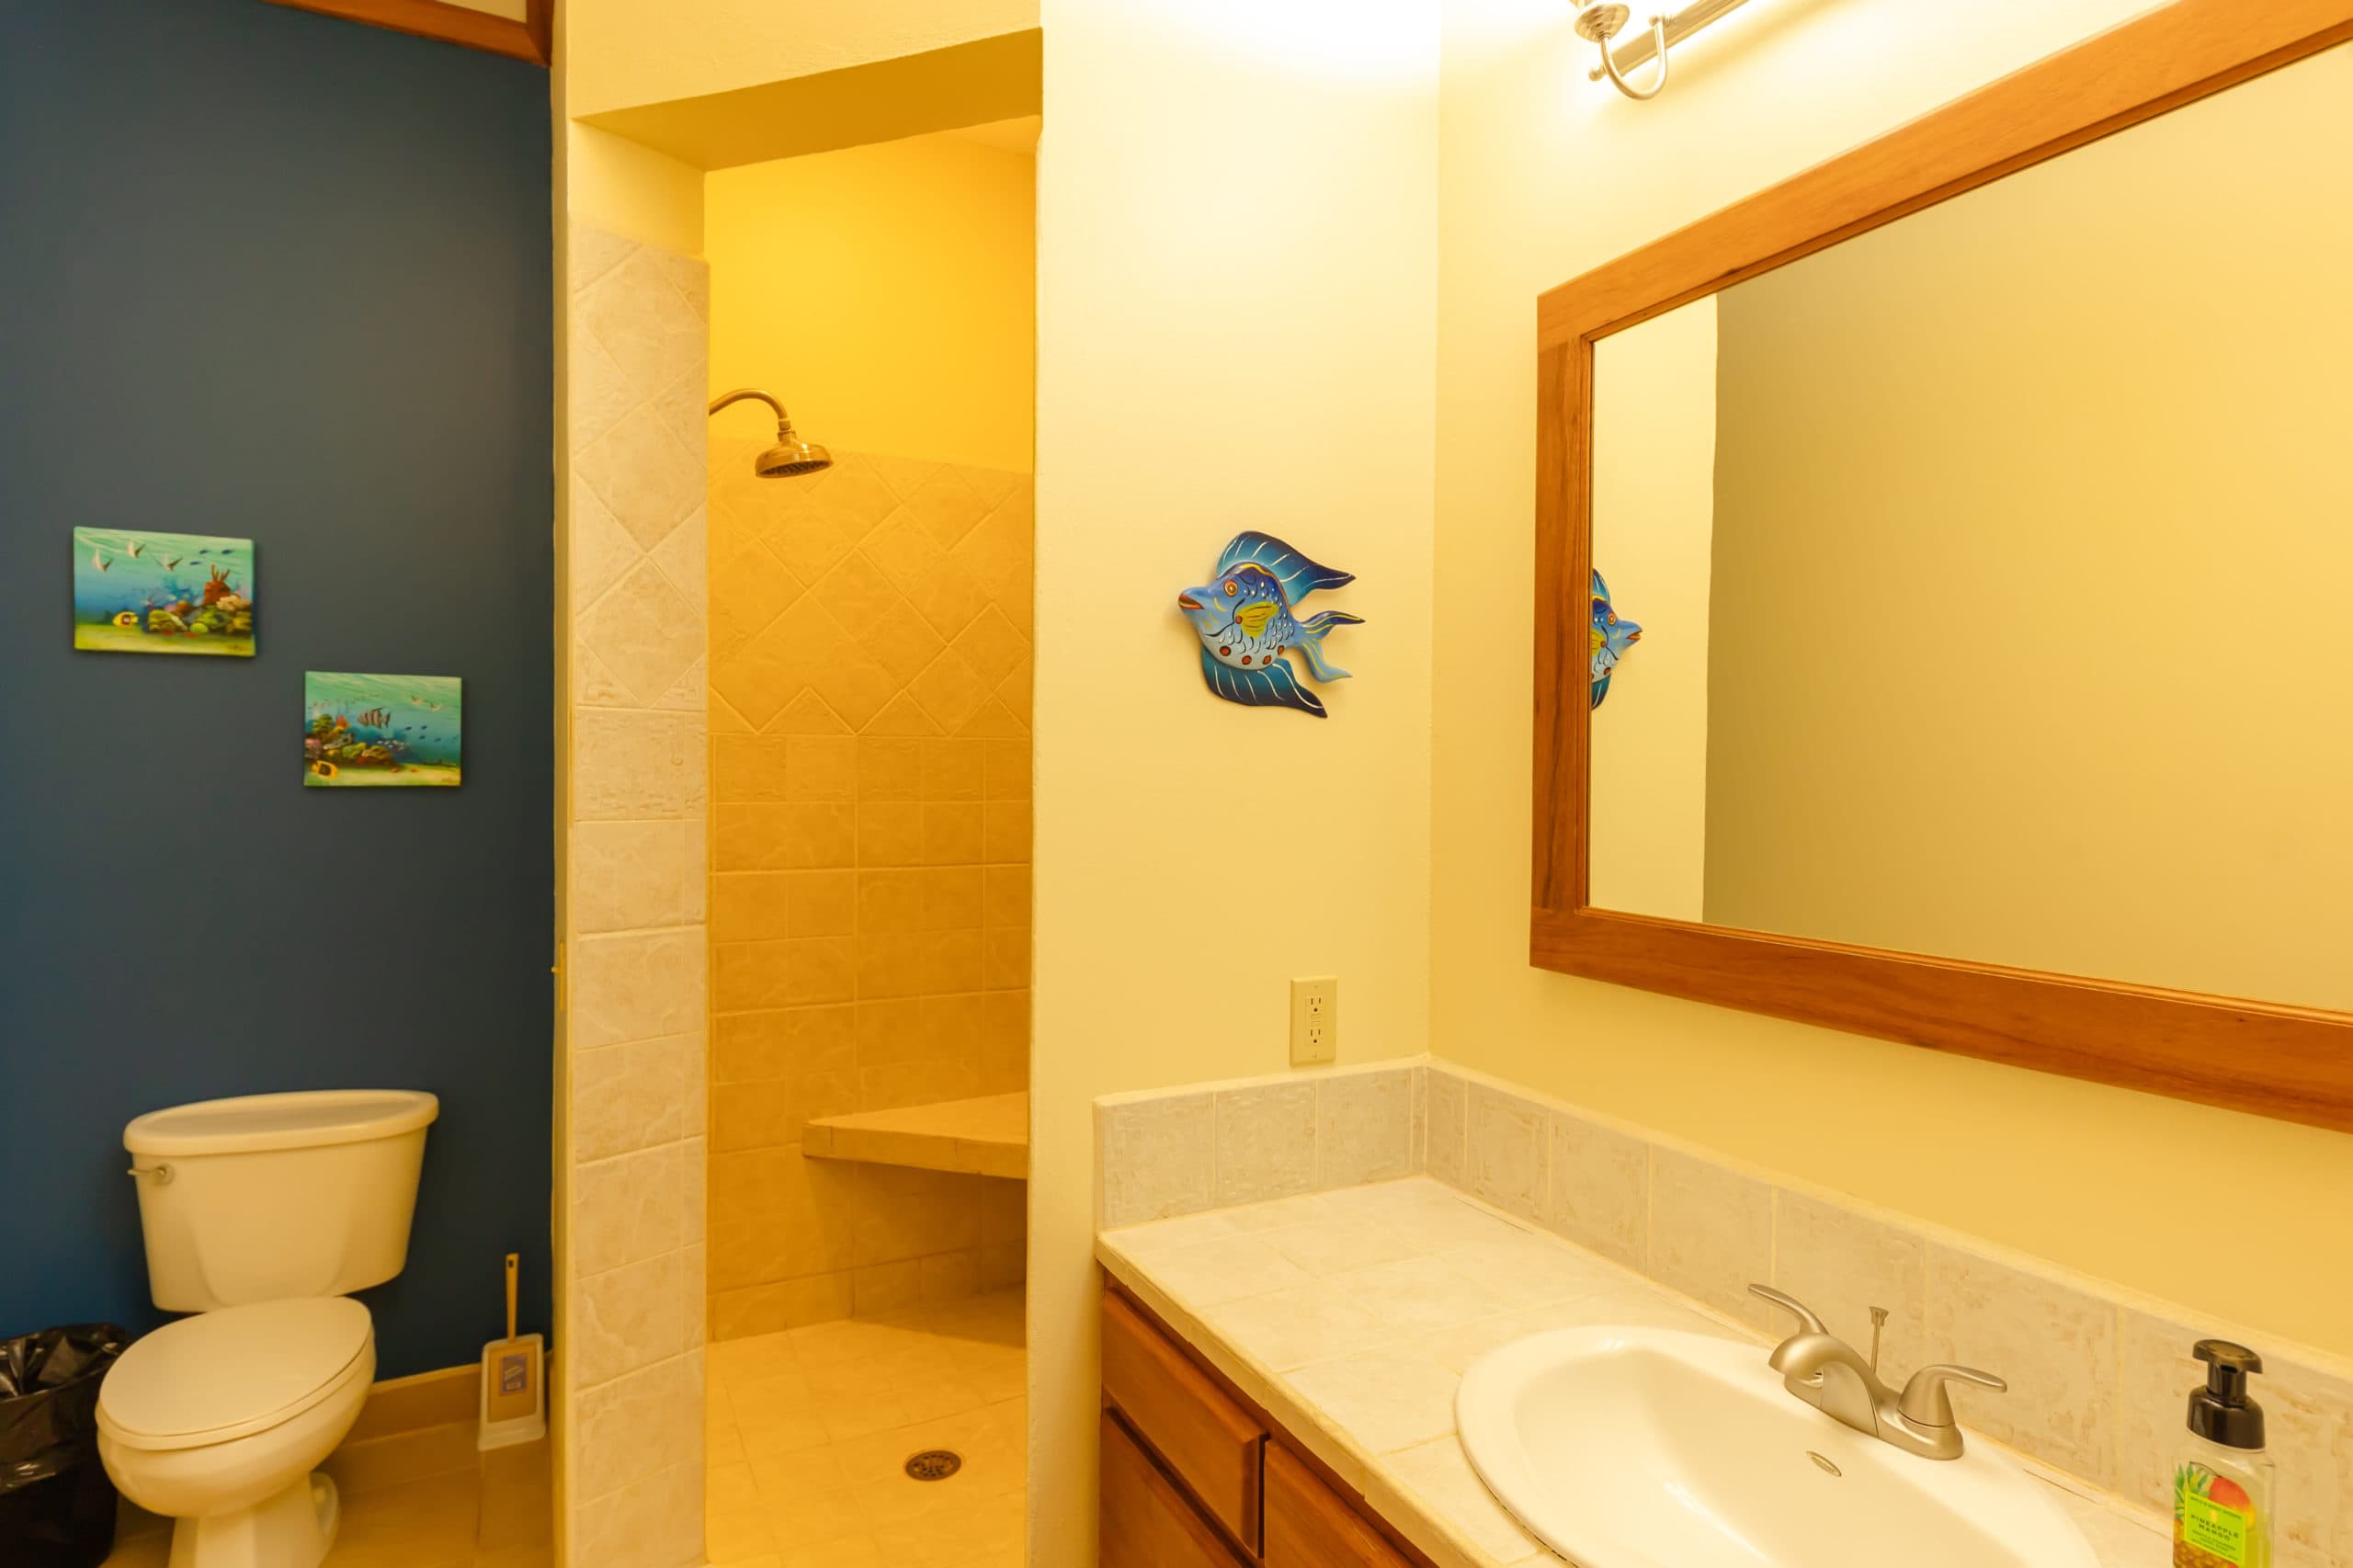 Stylish bathroom equipped with a walk-in shower combination, sleek sink, and all necessary amenities